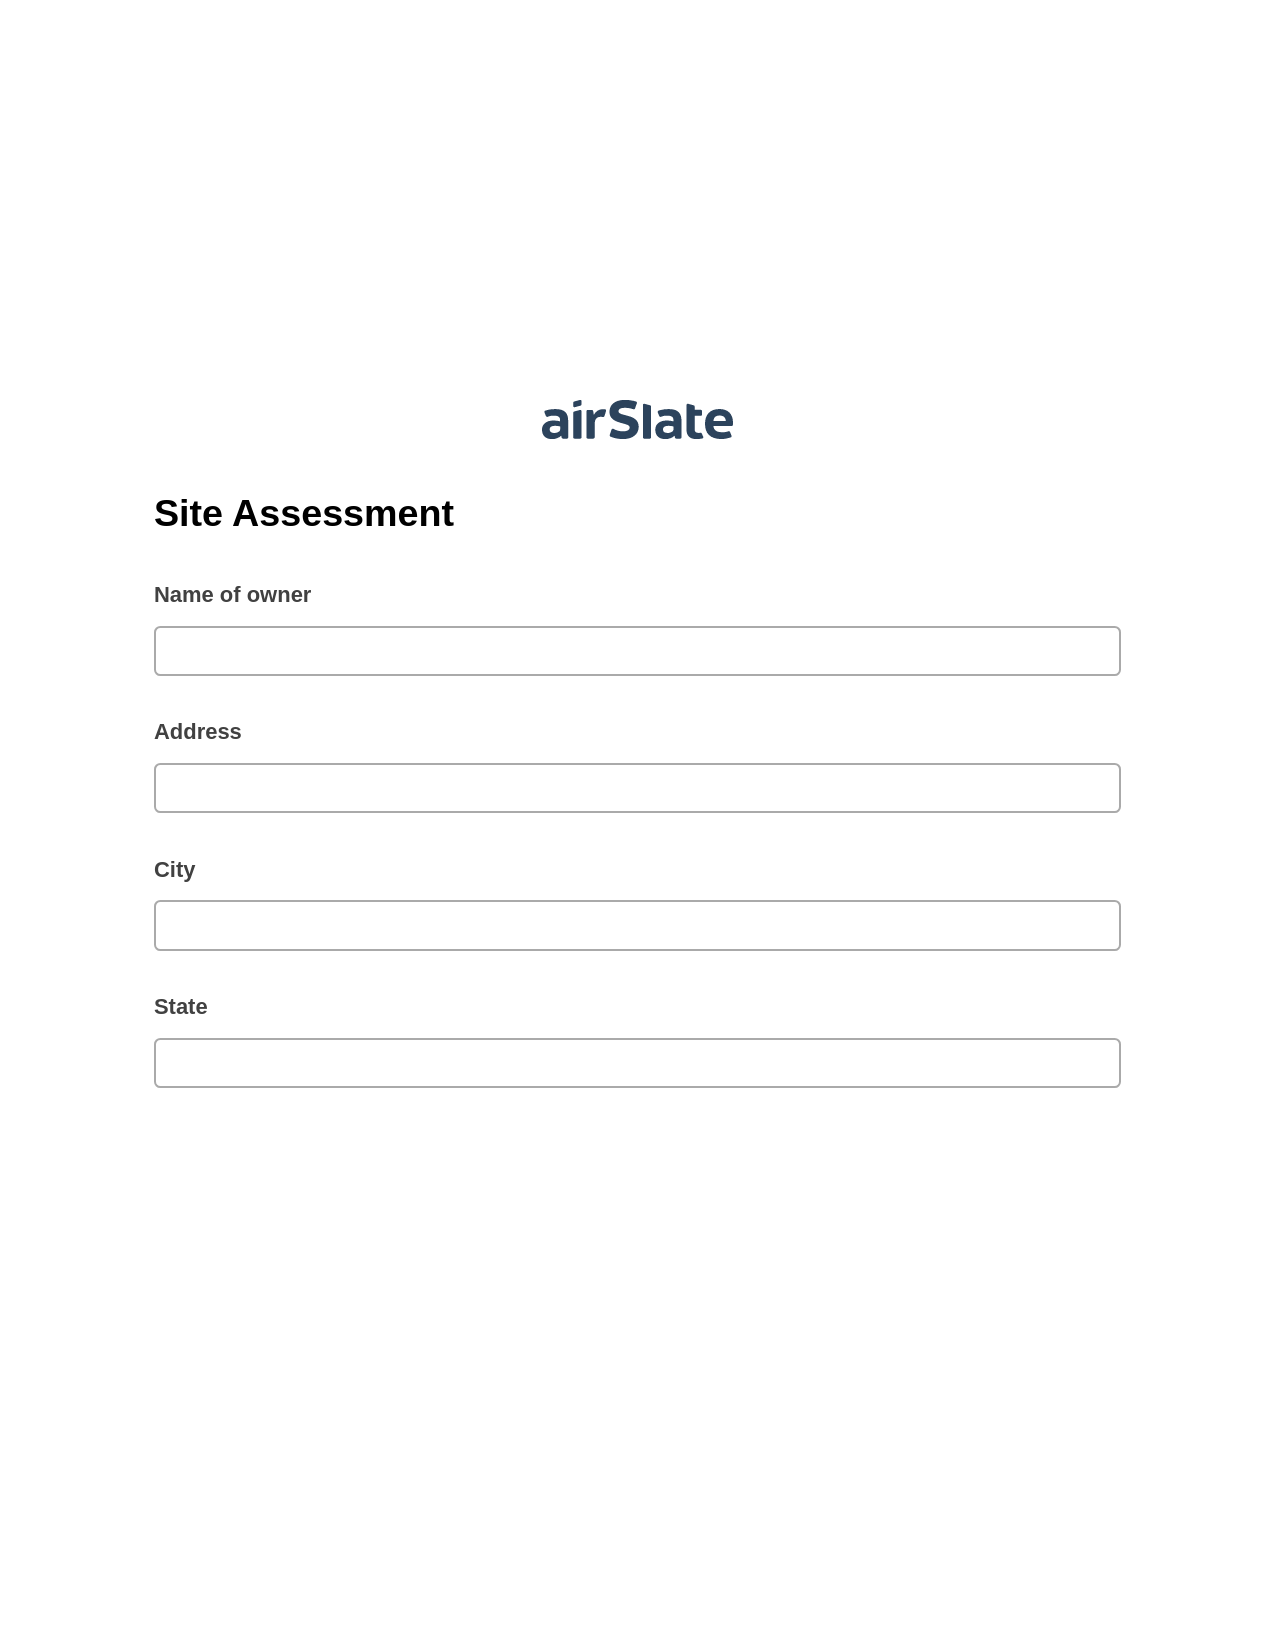 Site Assessment Pre-fill from Google Sheet Dropdown Options Bot, Assign Slate Name Bot, Email Notification Postfinish Bot